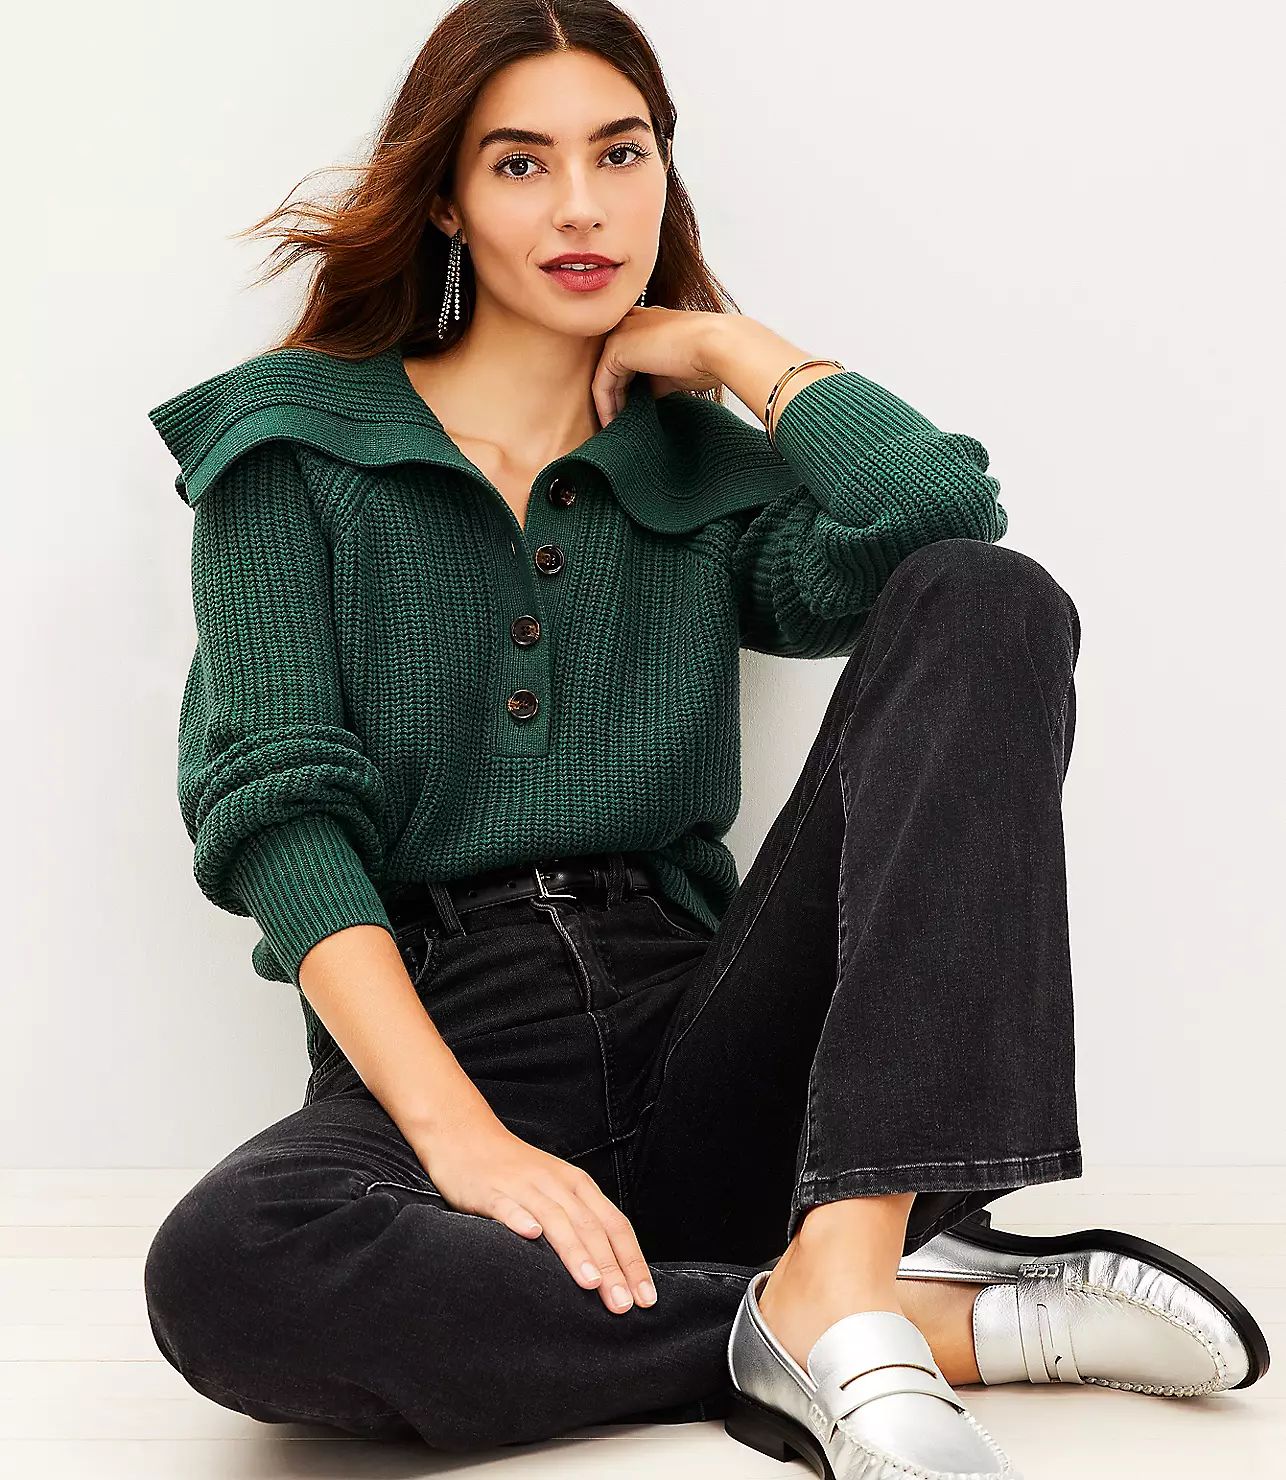 Ribbed Collared Sweater | LOFT